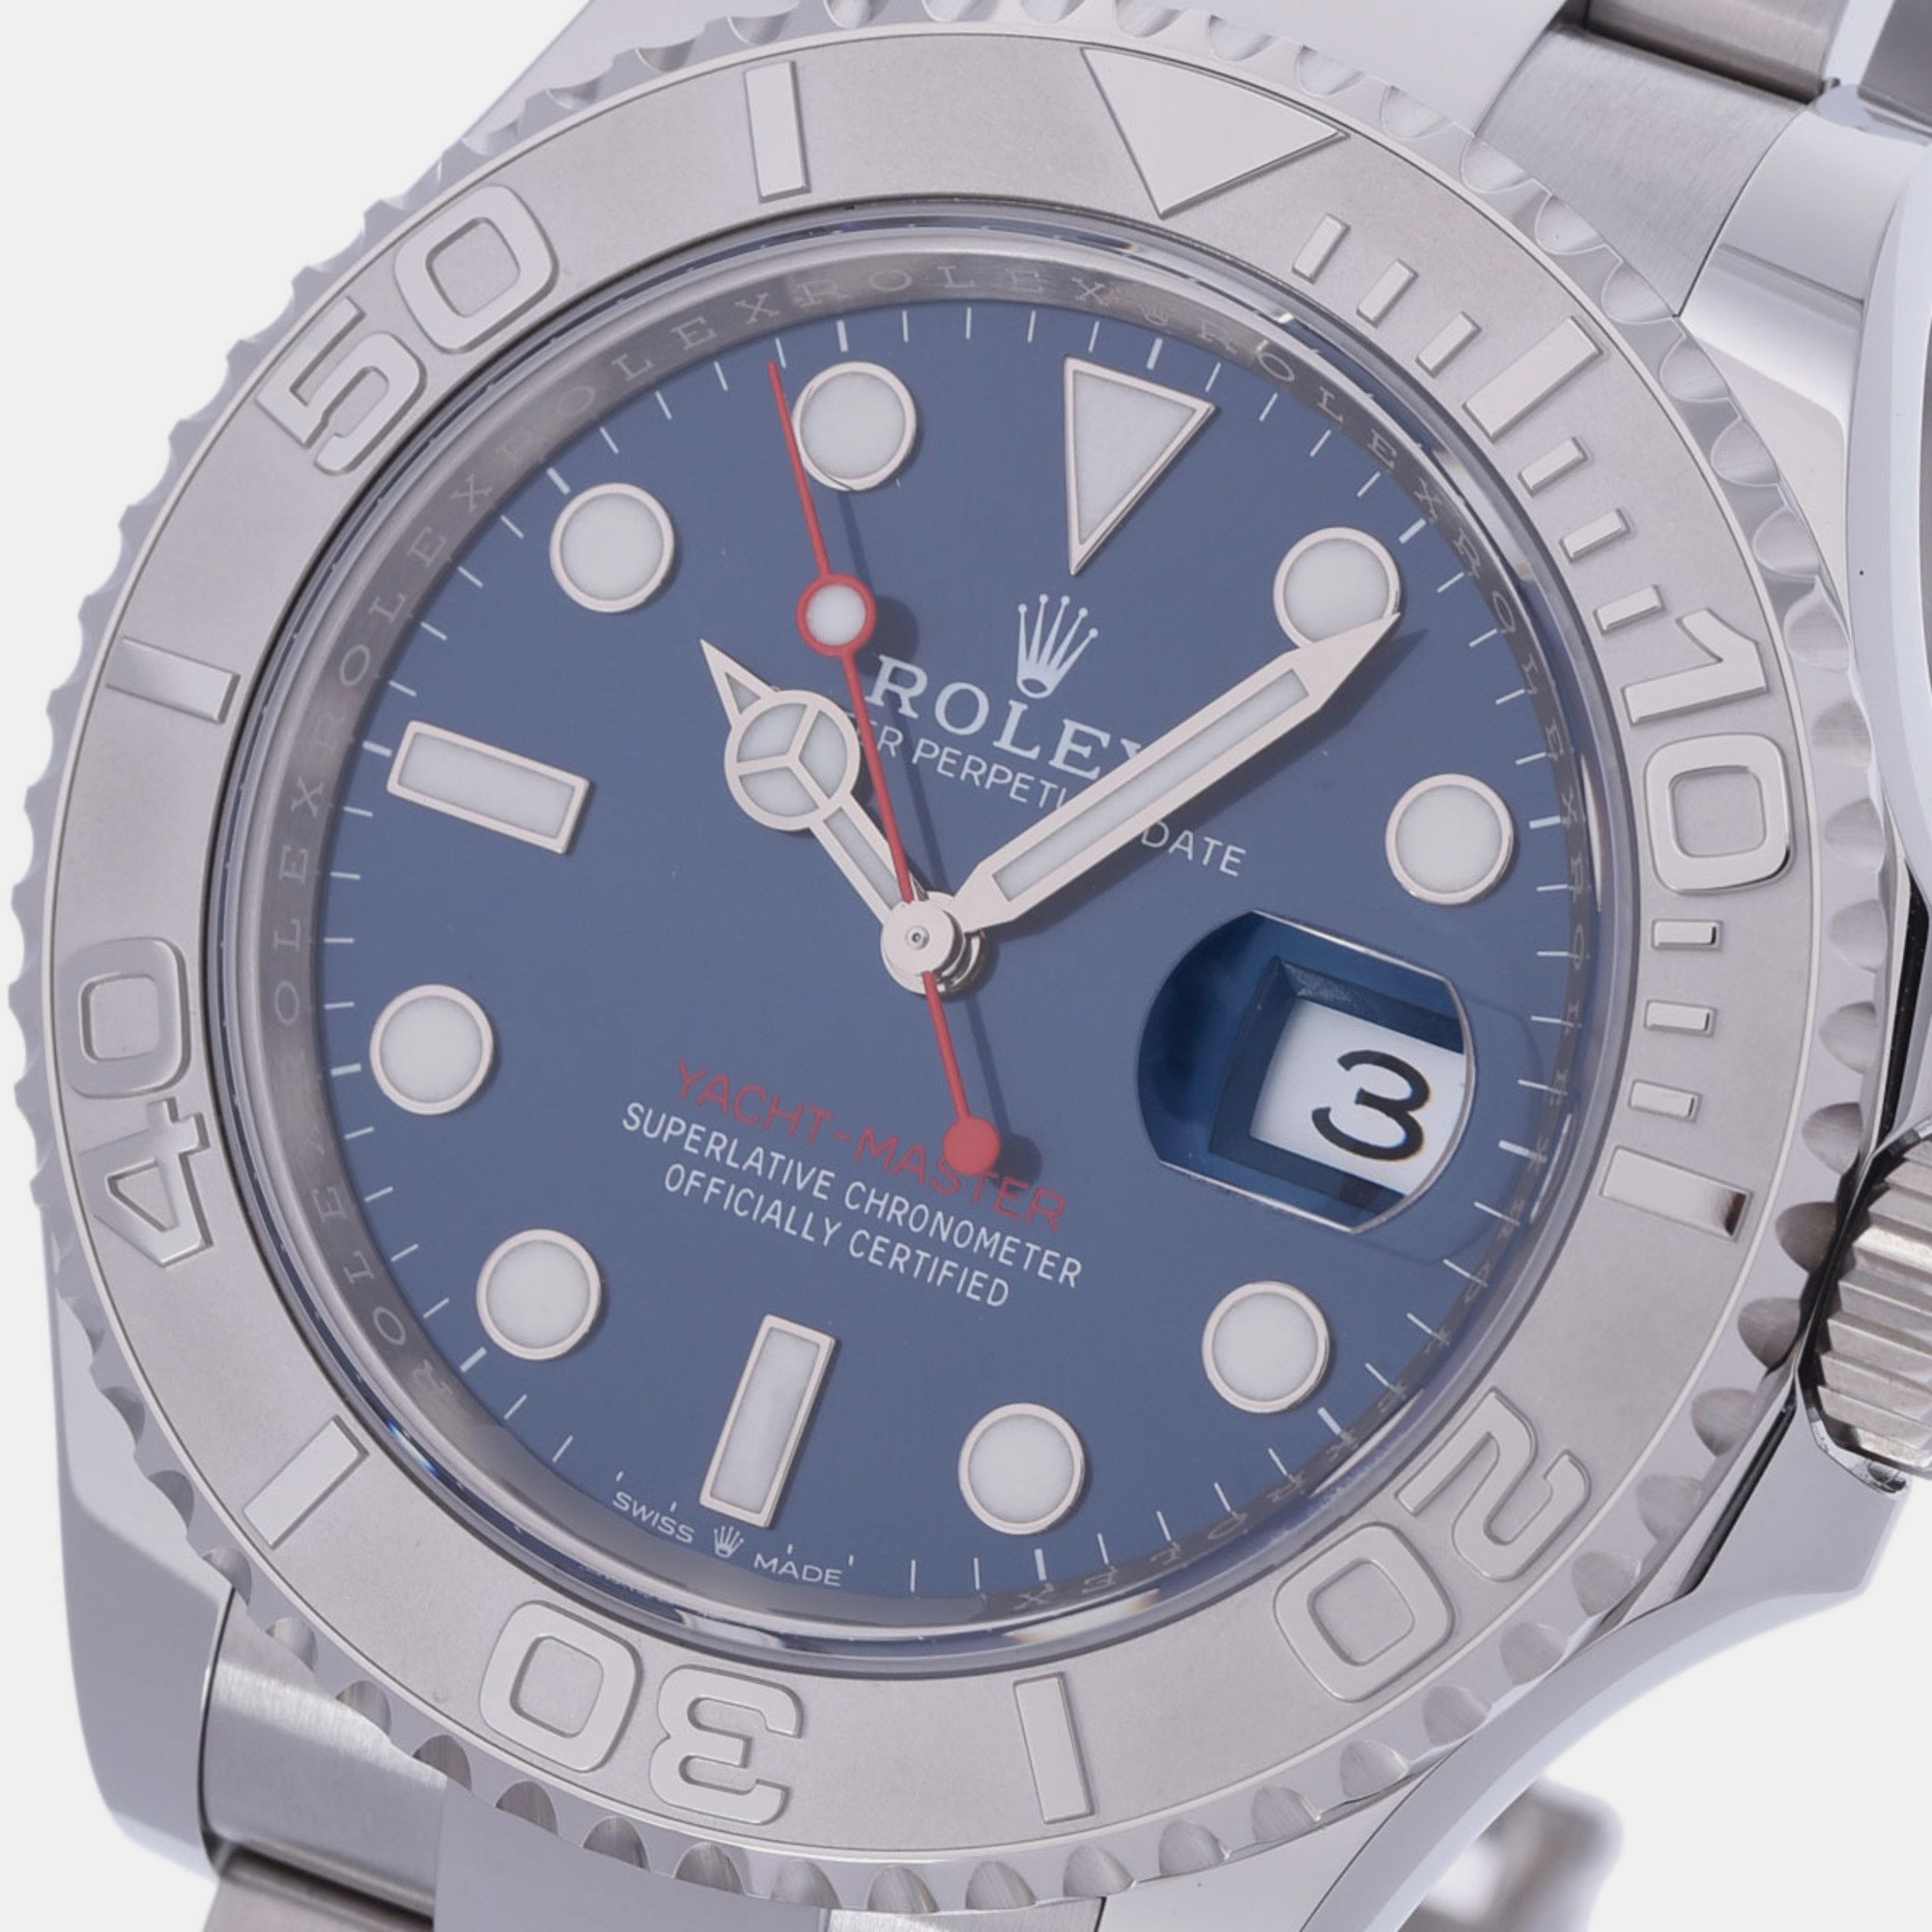 Rolex Blue Platinum And Stainless Steel Yacht-Master 126622 Automatic Men's Wristwatch 40 Mm